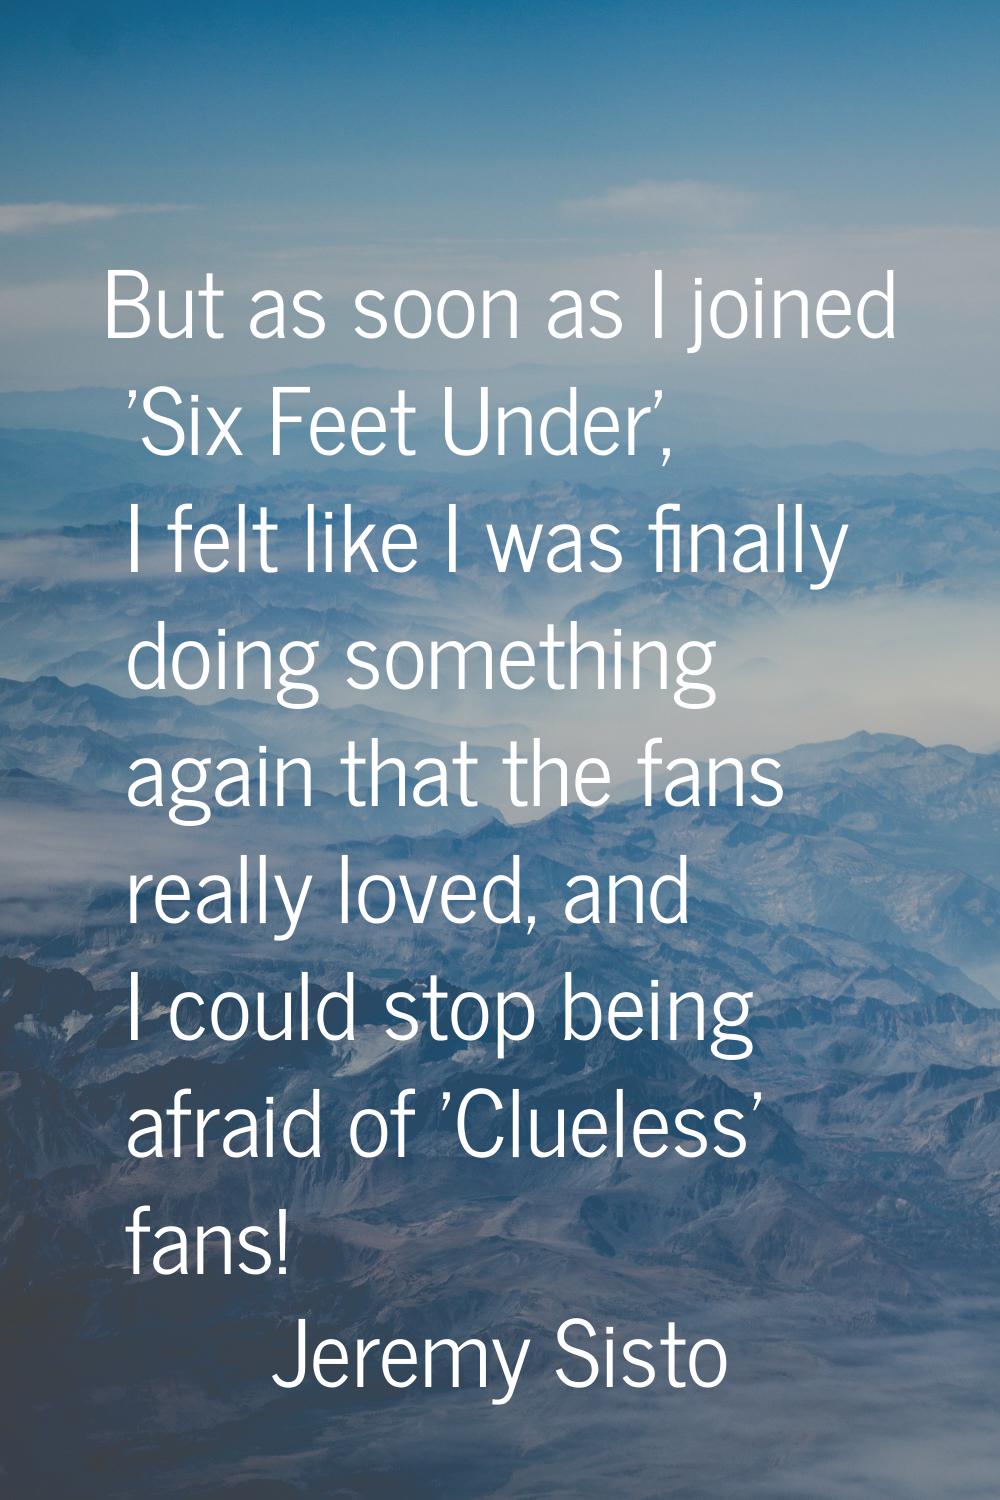 But as soon as I joined 'Six Feet Under', I felt like I was finally doing something again that the 